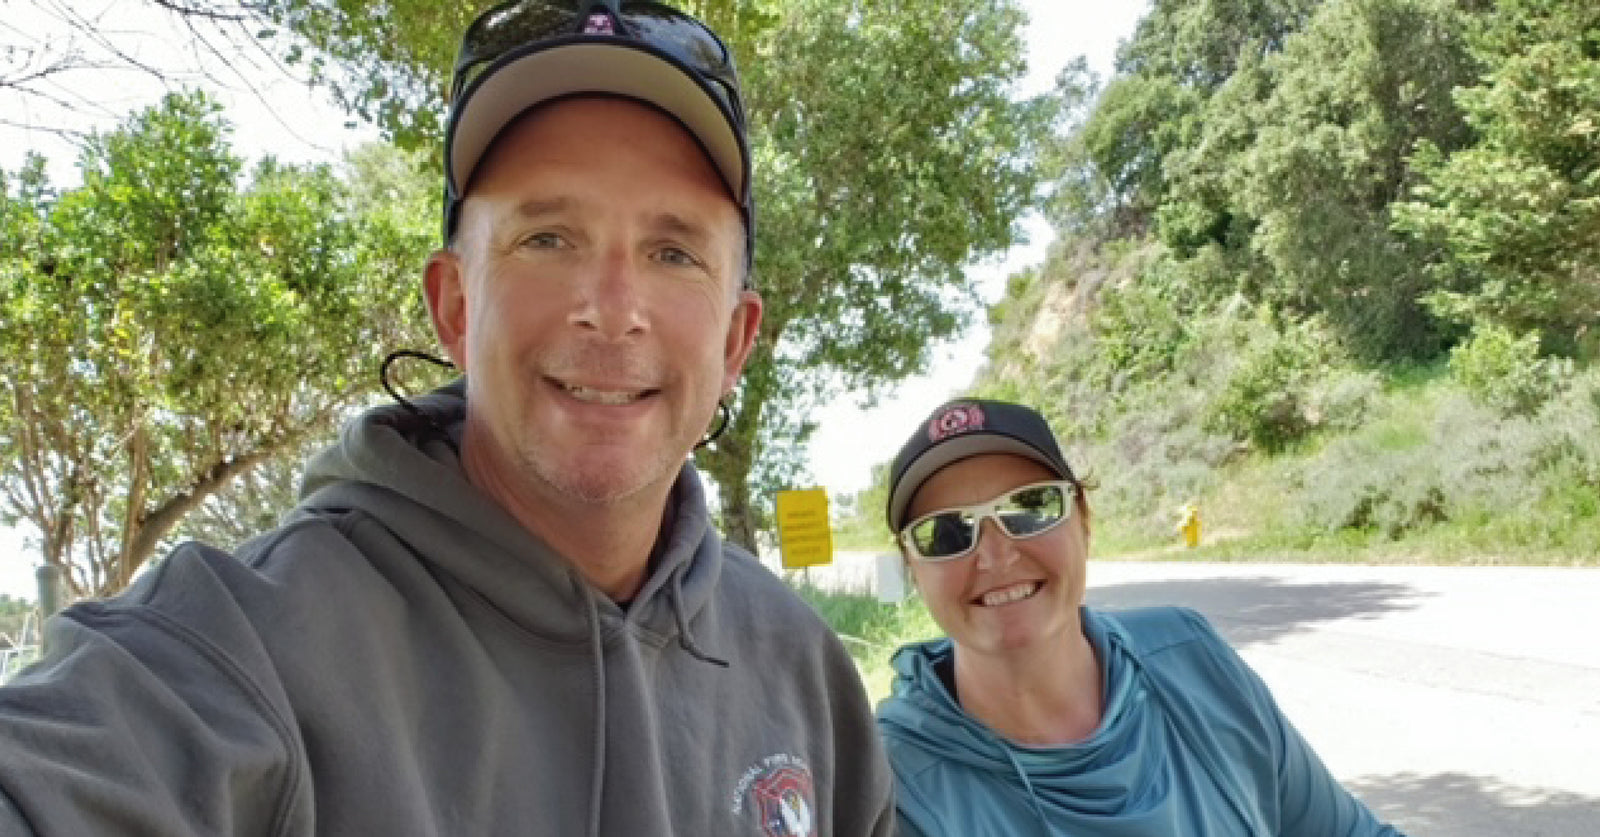 Ken Larsen and his wife smiling and riding bikes in California.